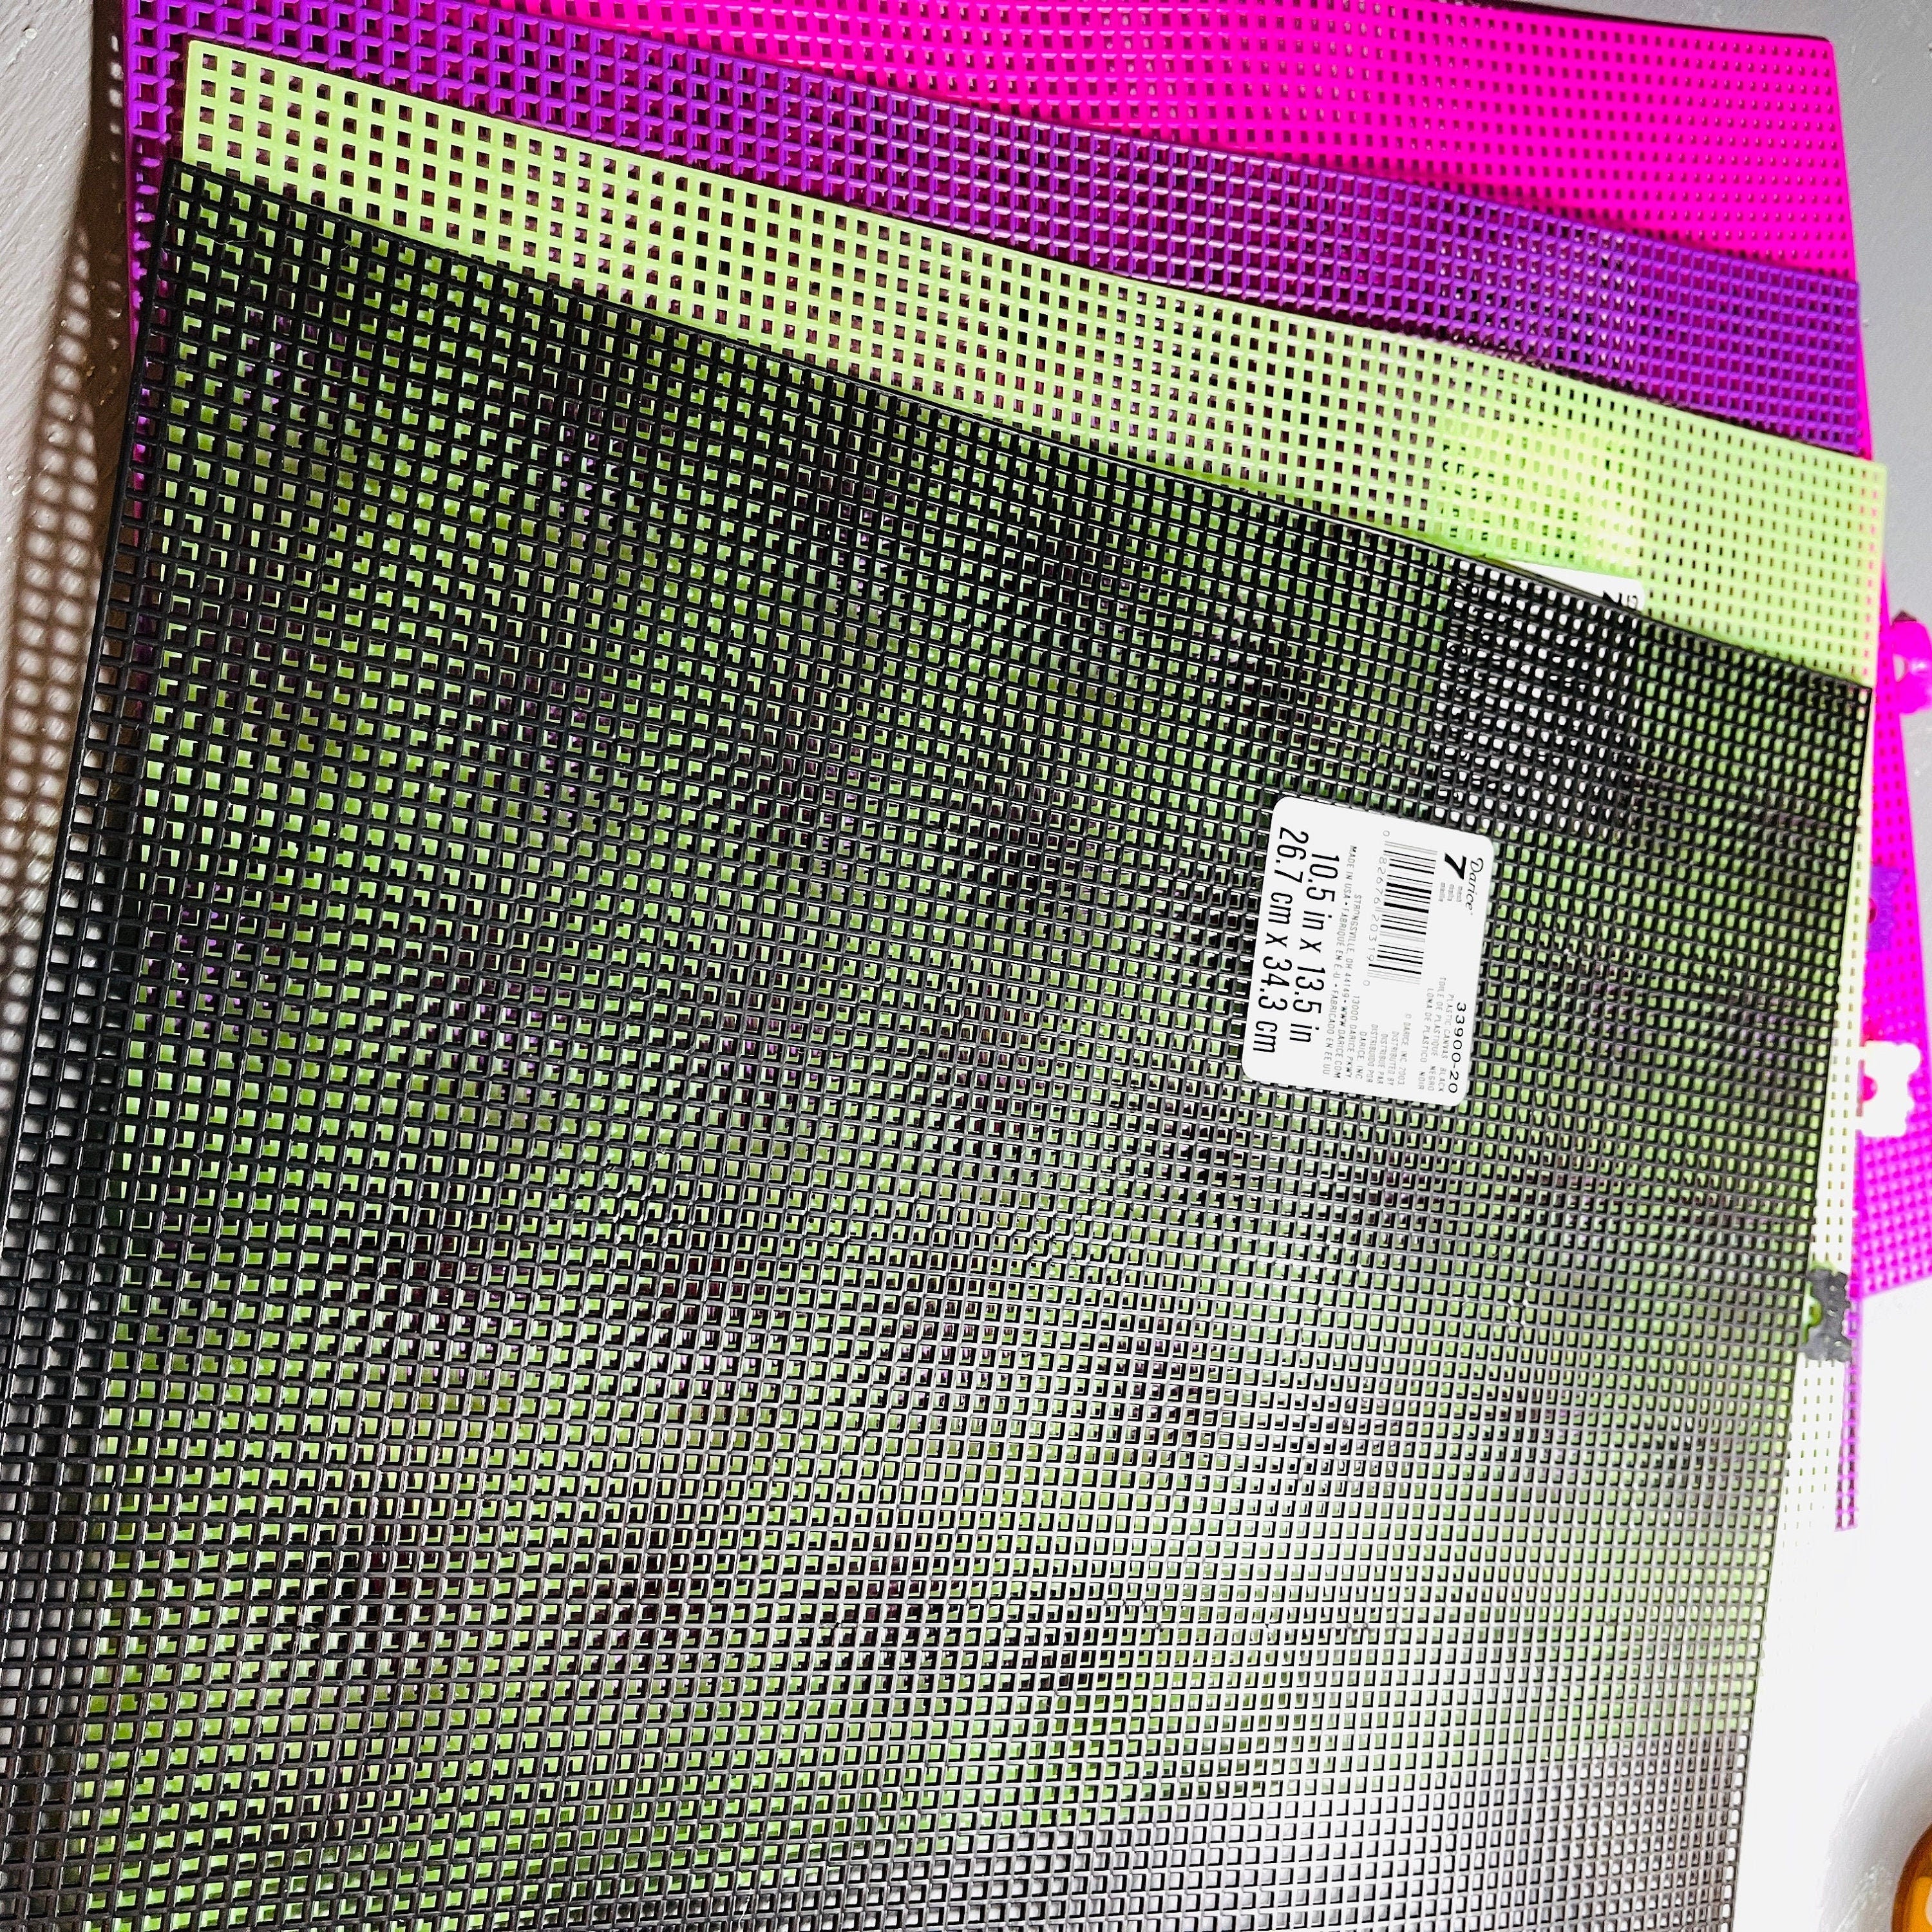 7 Mesh Clear Plastic Canvas 3 Sheets by Darice 10.5 X 13.5 Inches